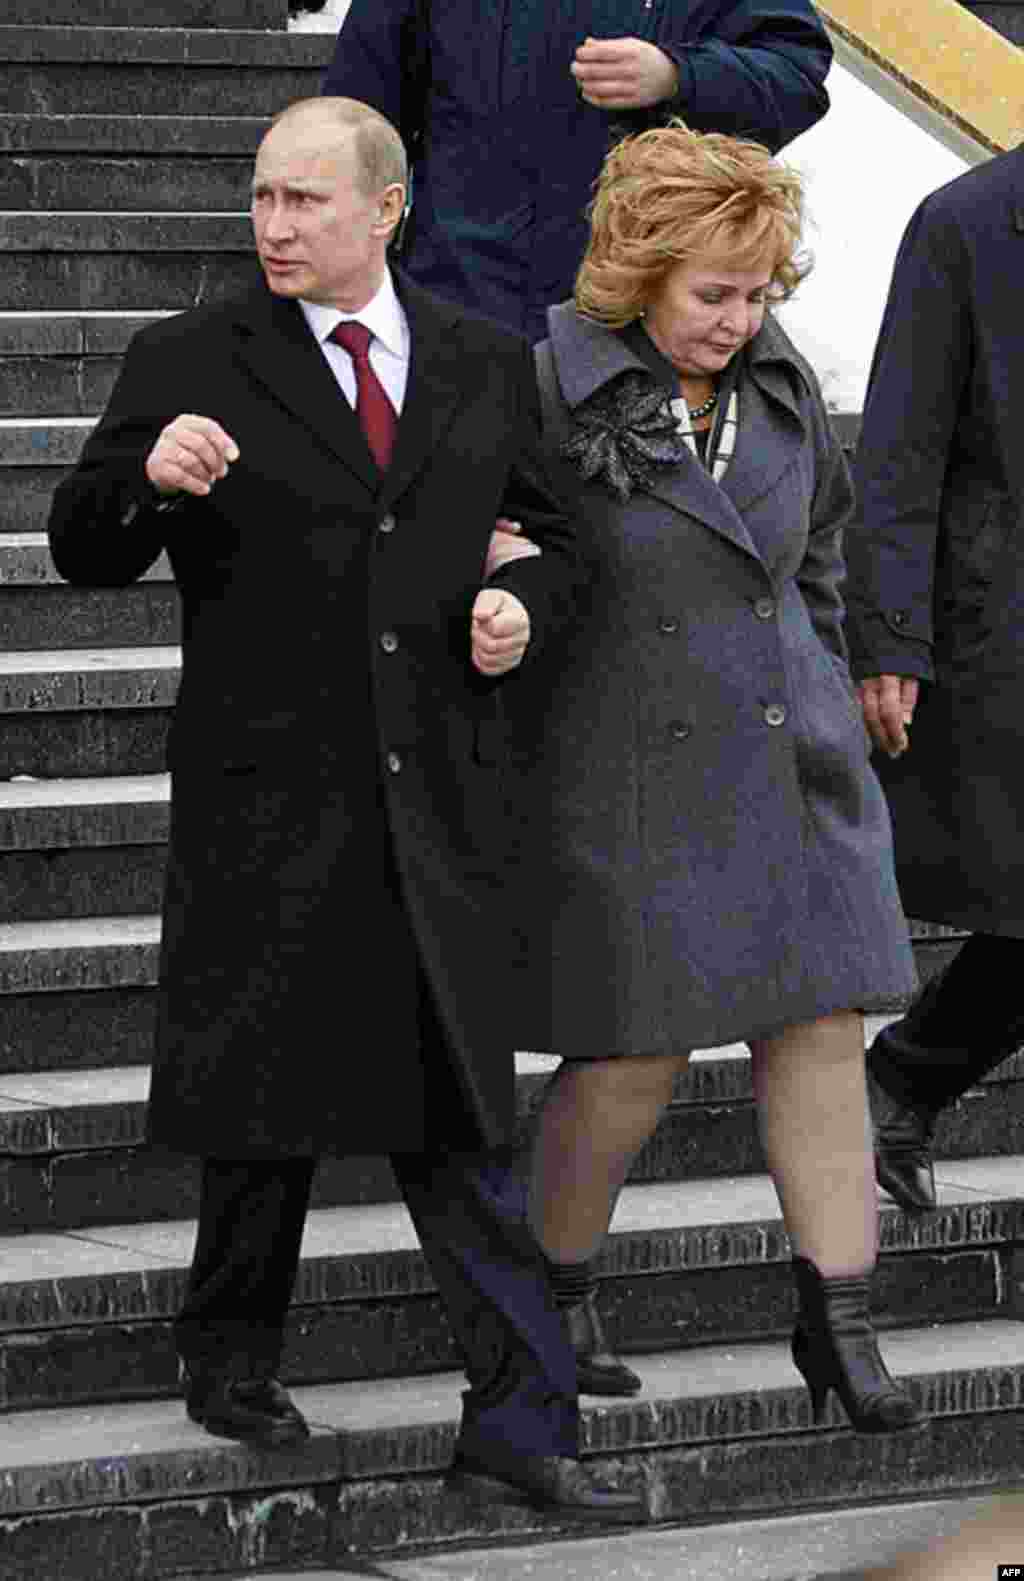 Russian Prime Minister and presidential candidate Vladimir Putin and his wife Lyudmila leave a polling station in Moscow, Russia, March 4, 2012. (AP)